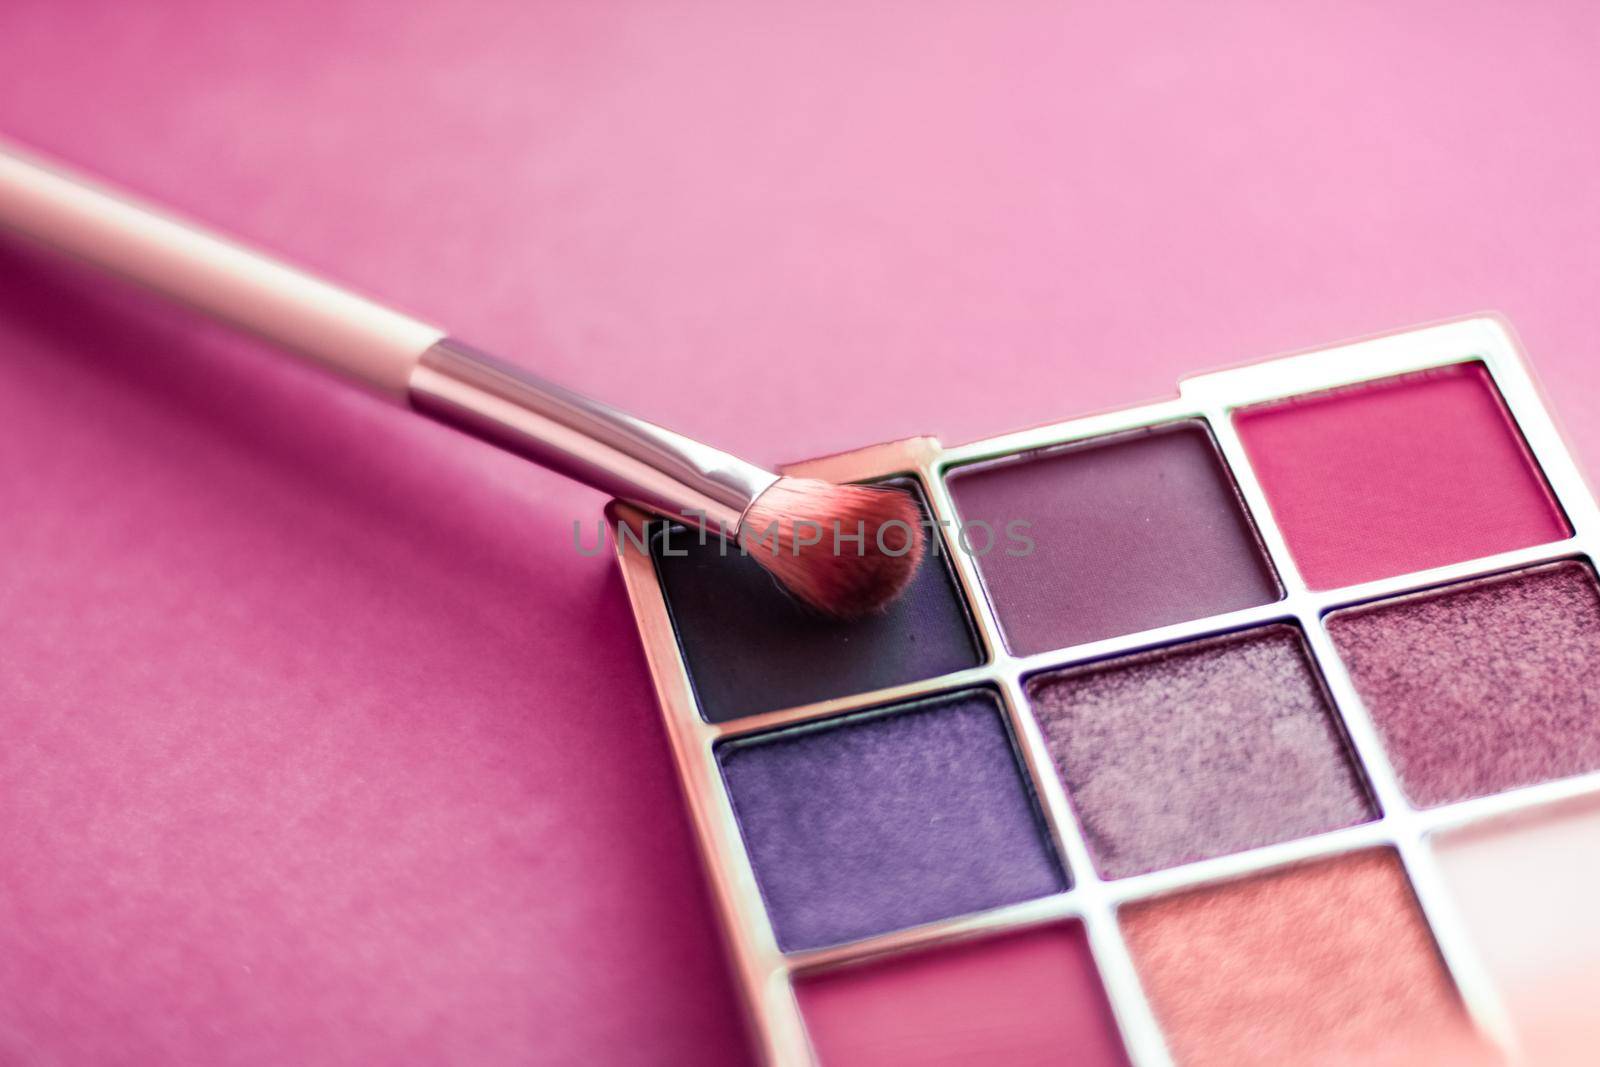 Eyeshadow palette and make-up brush on pink background, eye shadows cosmetics product as luxury beauty brand promotion and holiday fashion blog design by Anneleven